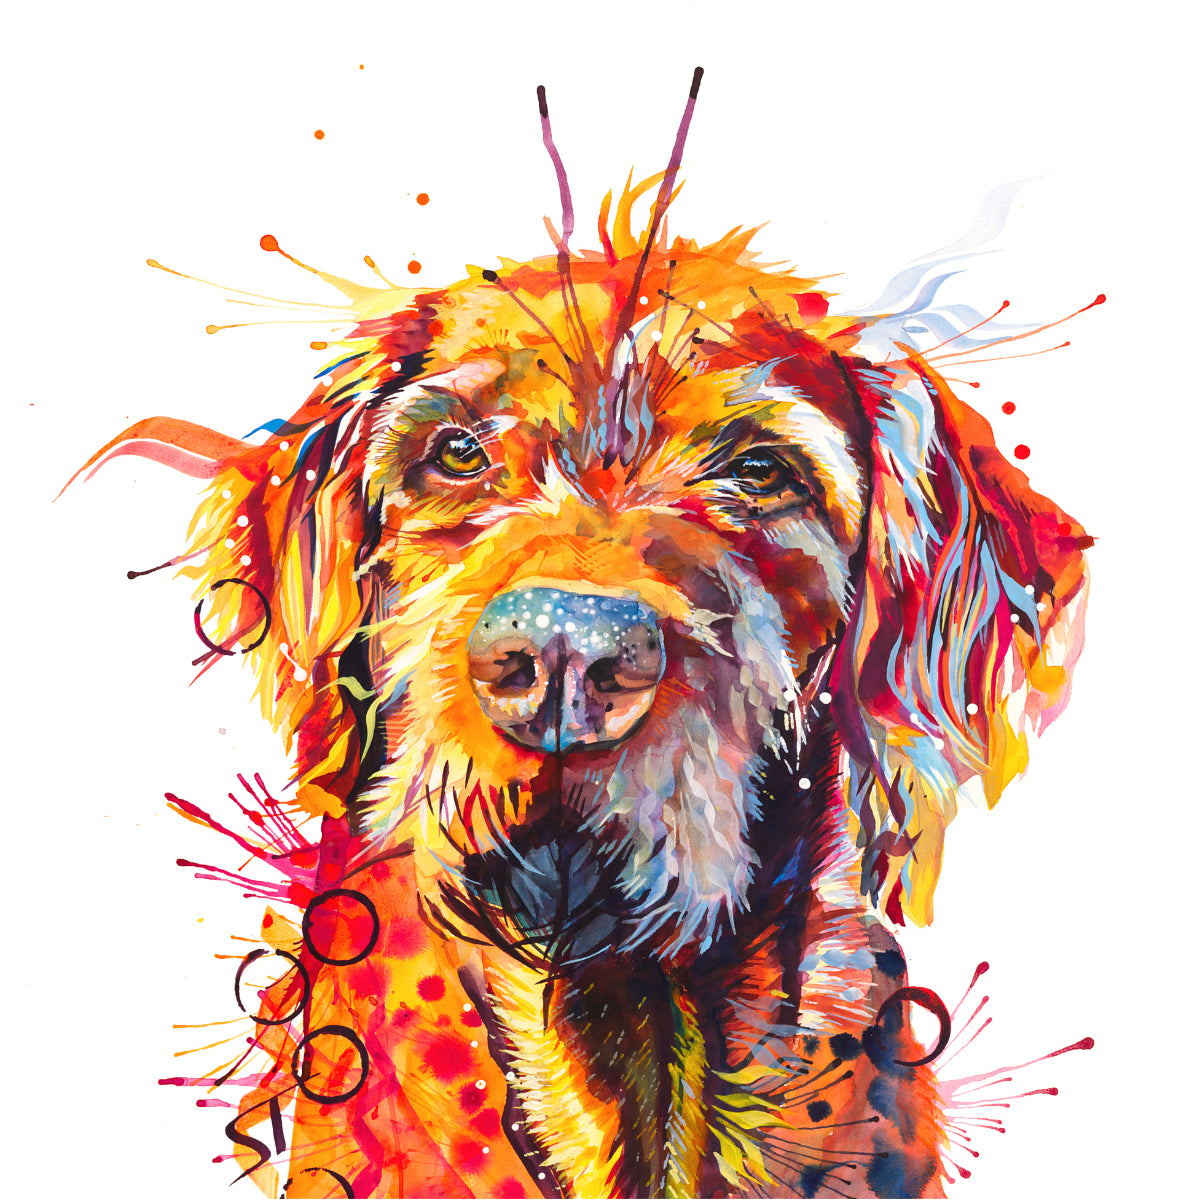 Hamish the Wirehaired Vizsla Canvas